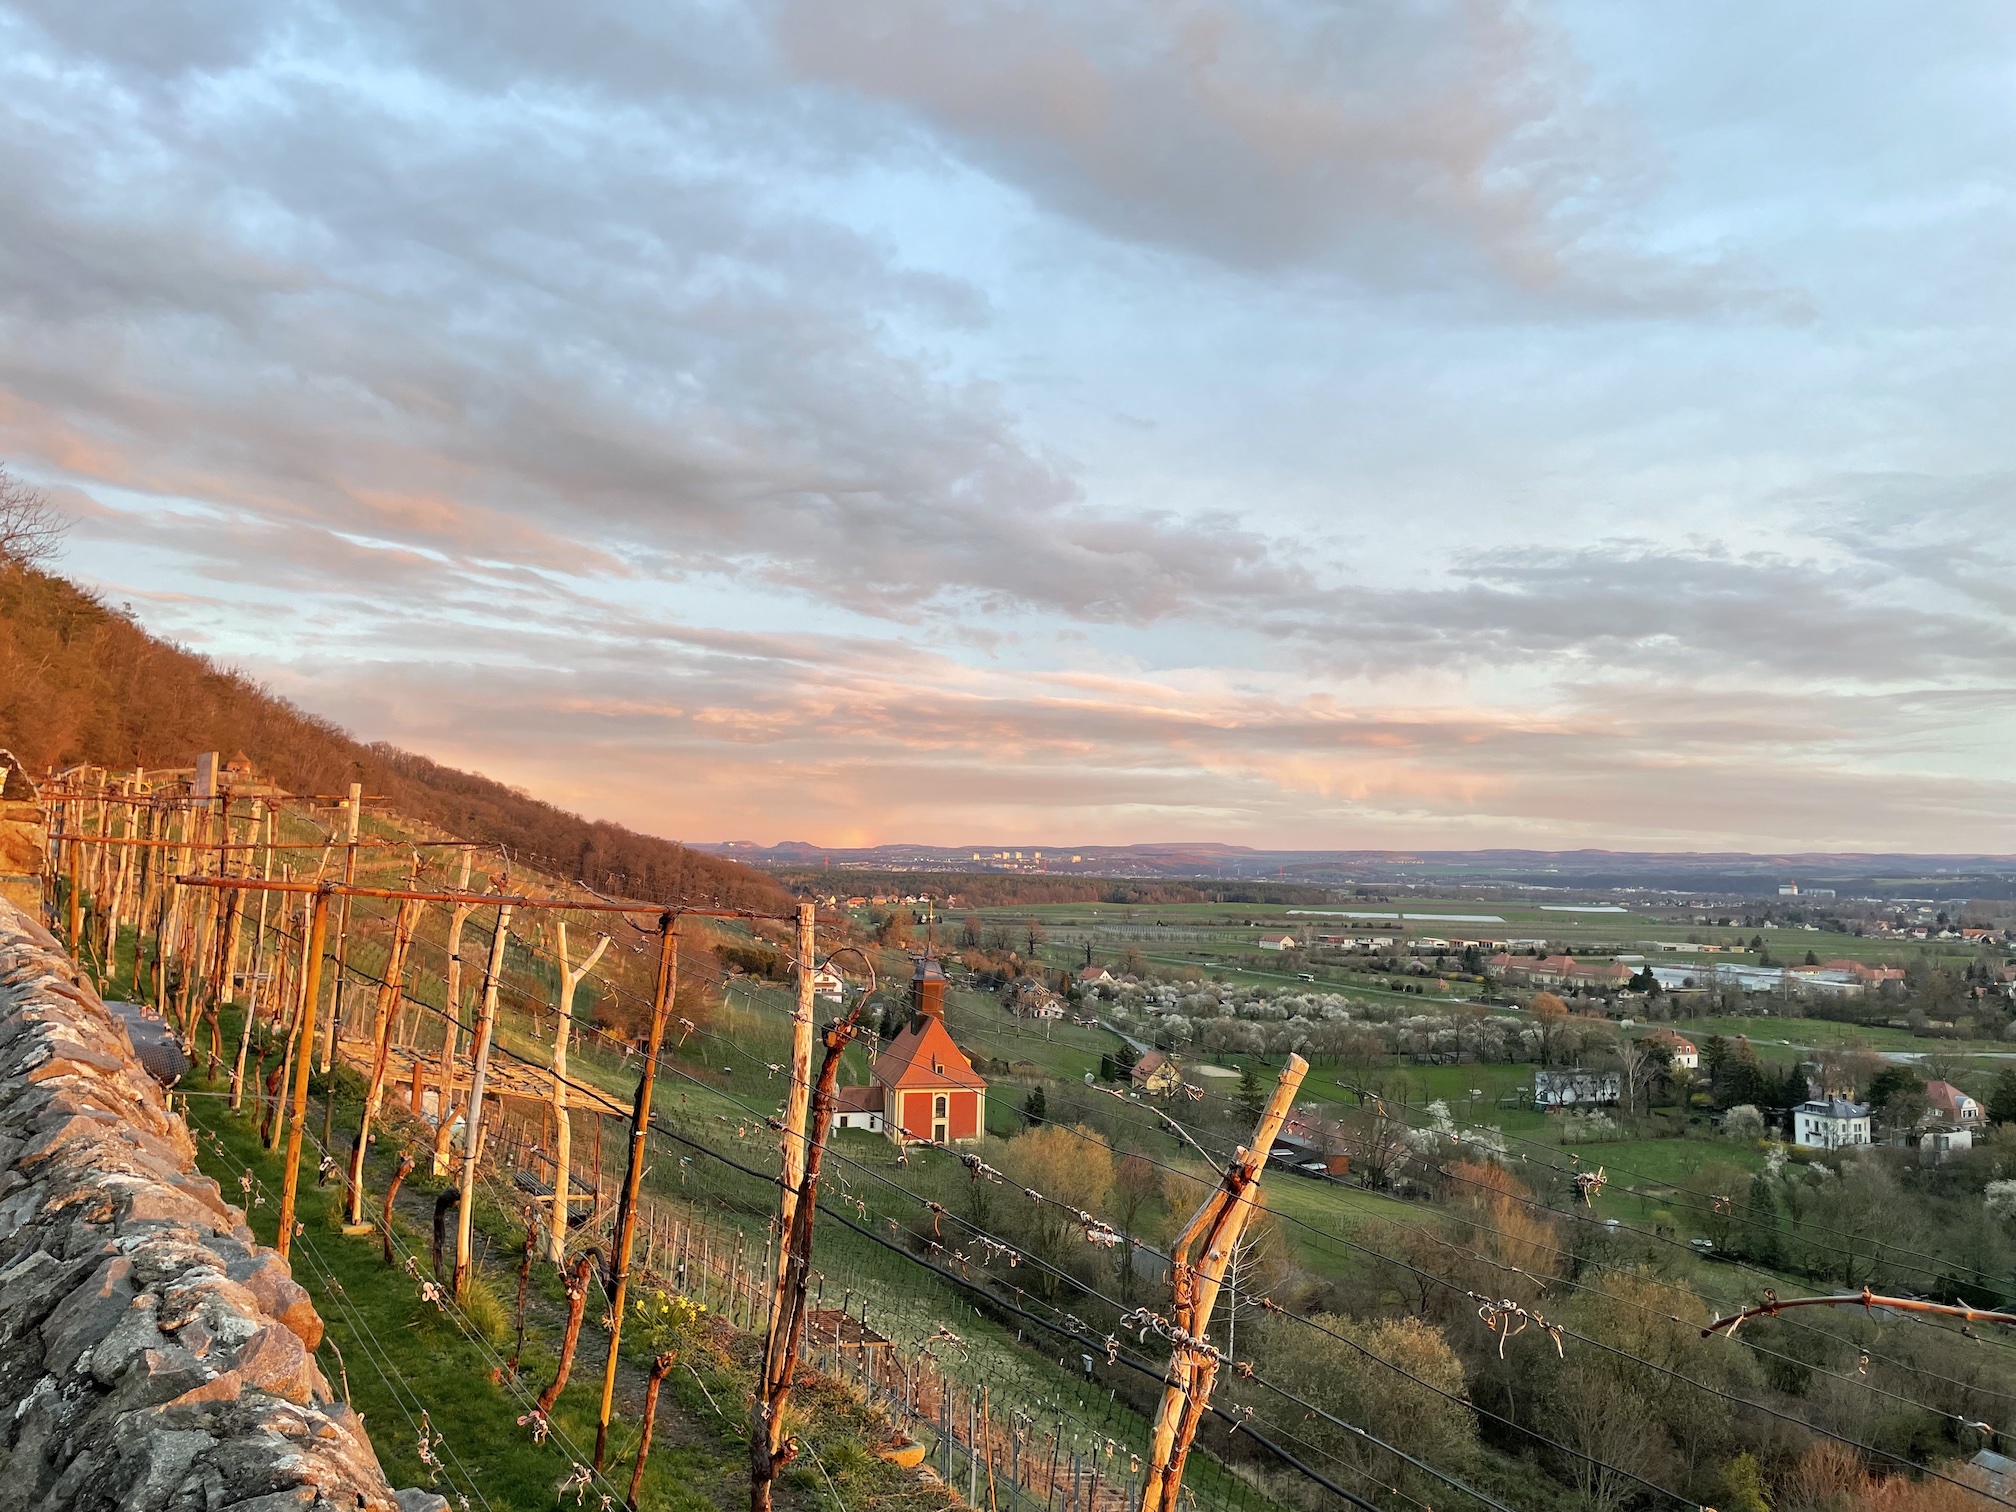 A view over a vineyard as the sun sets